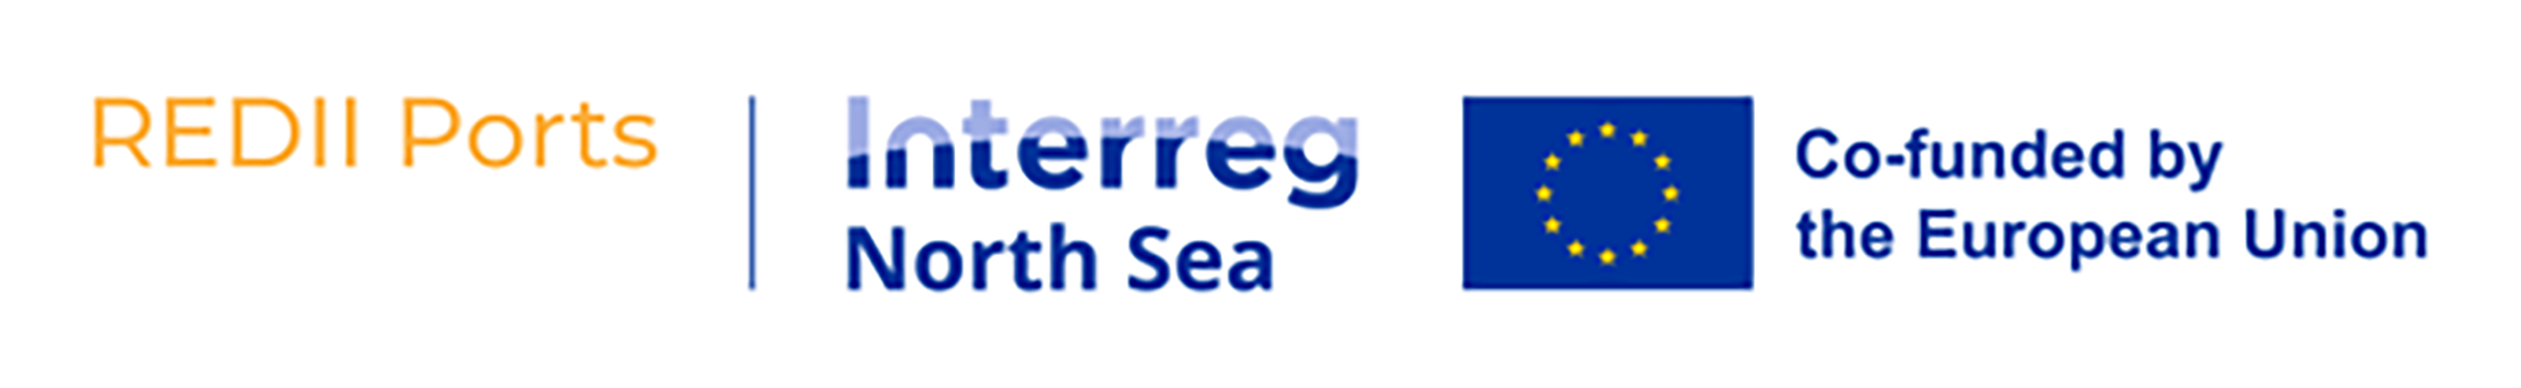 REDII Ports Interred North Sea Co-founded by the European Union